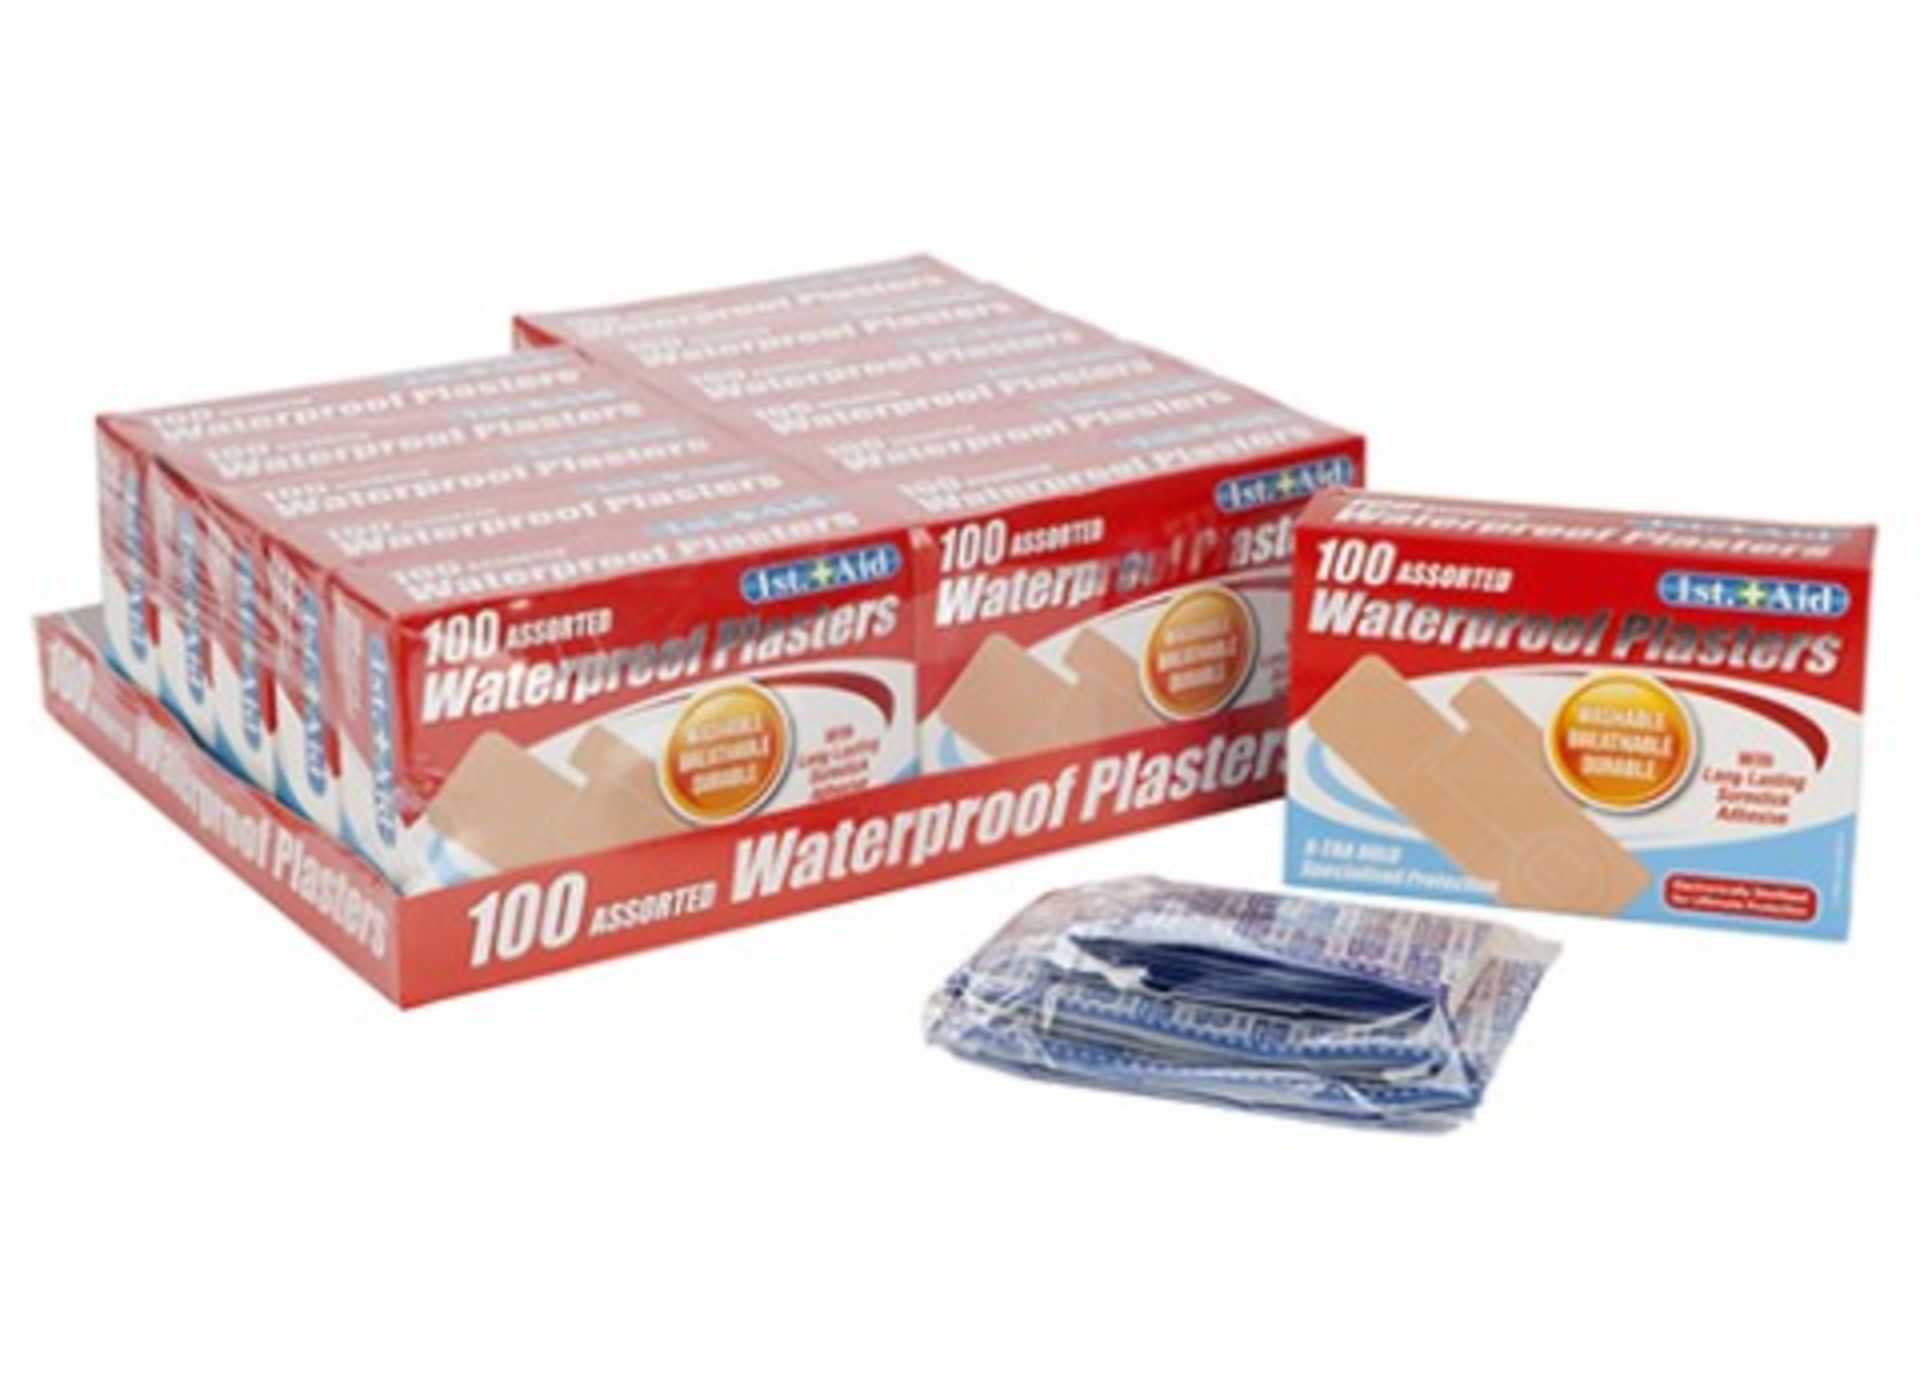 V *TRADE QTY* Brand New Twelve Boxes of 100 assorted waterproof plasters X 8 YOUR BID PRICE TO BE